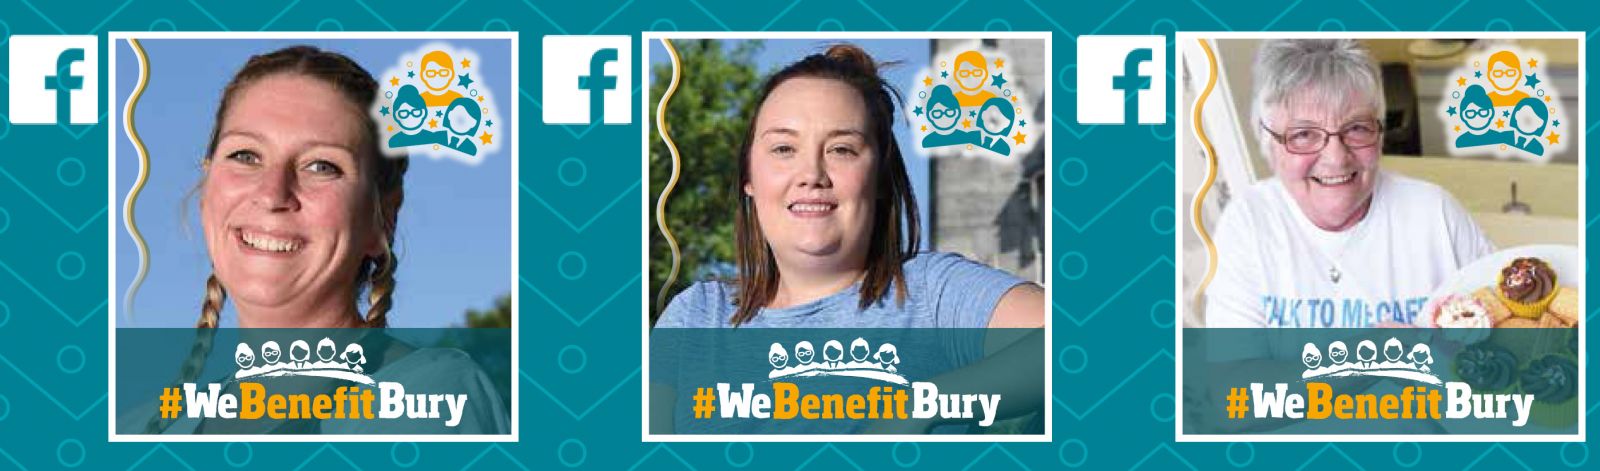 Download a Facebook frame to show your support for We Benefit Bury and end negative council stereotypes